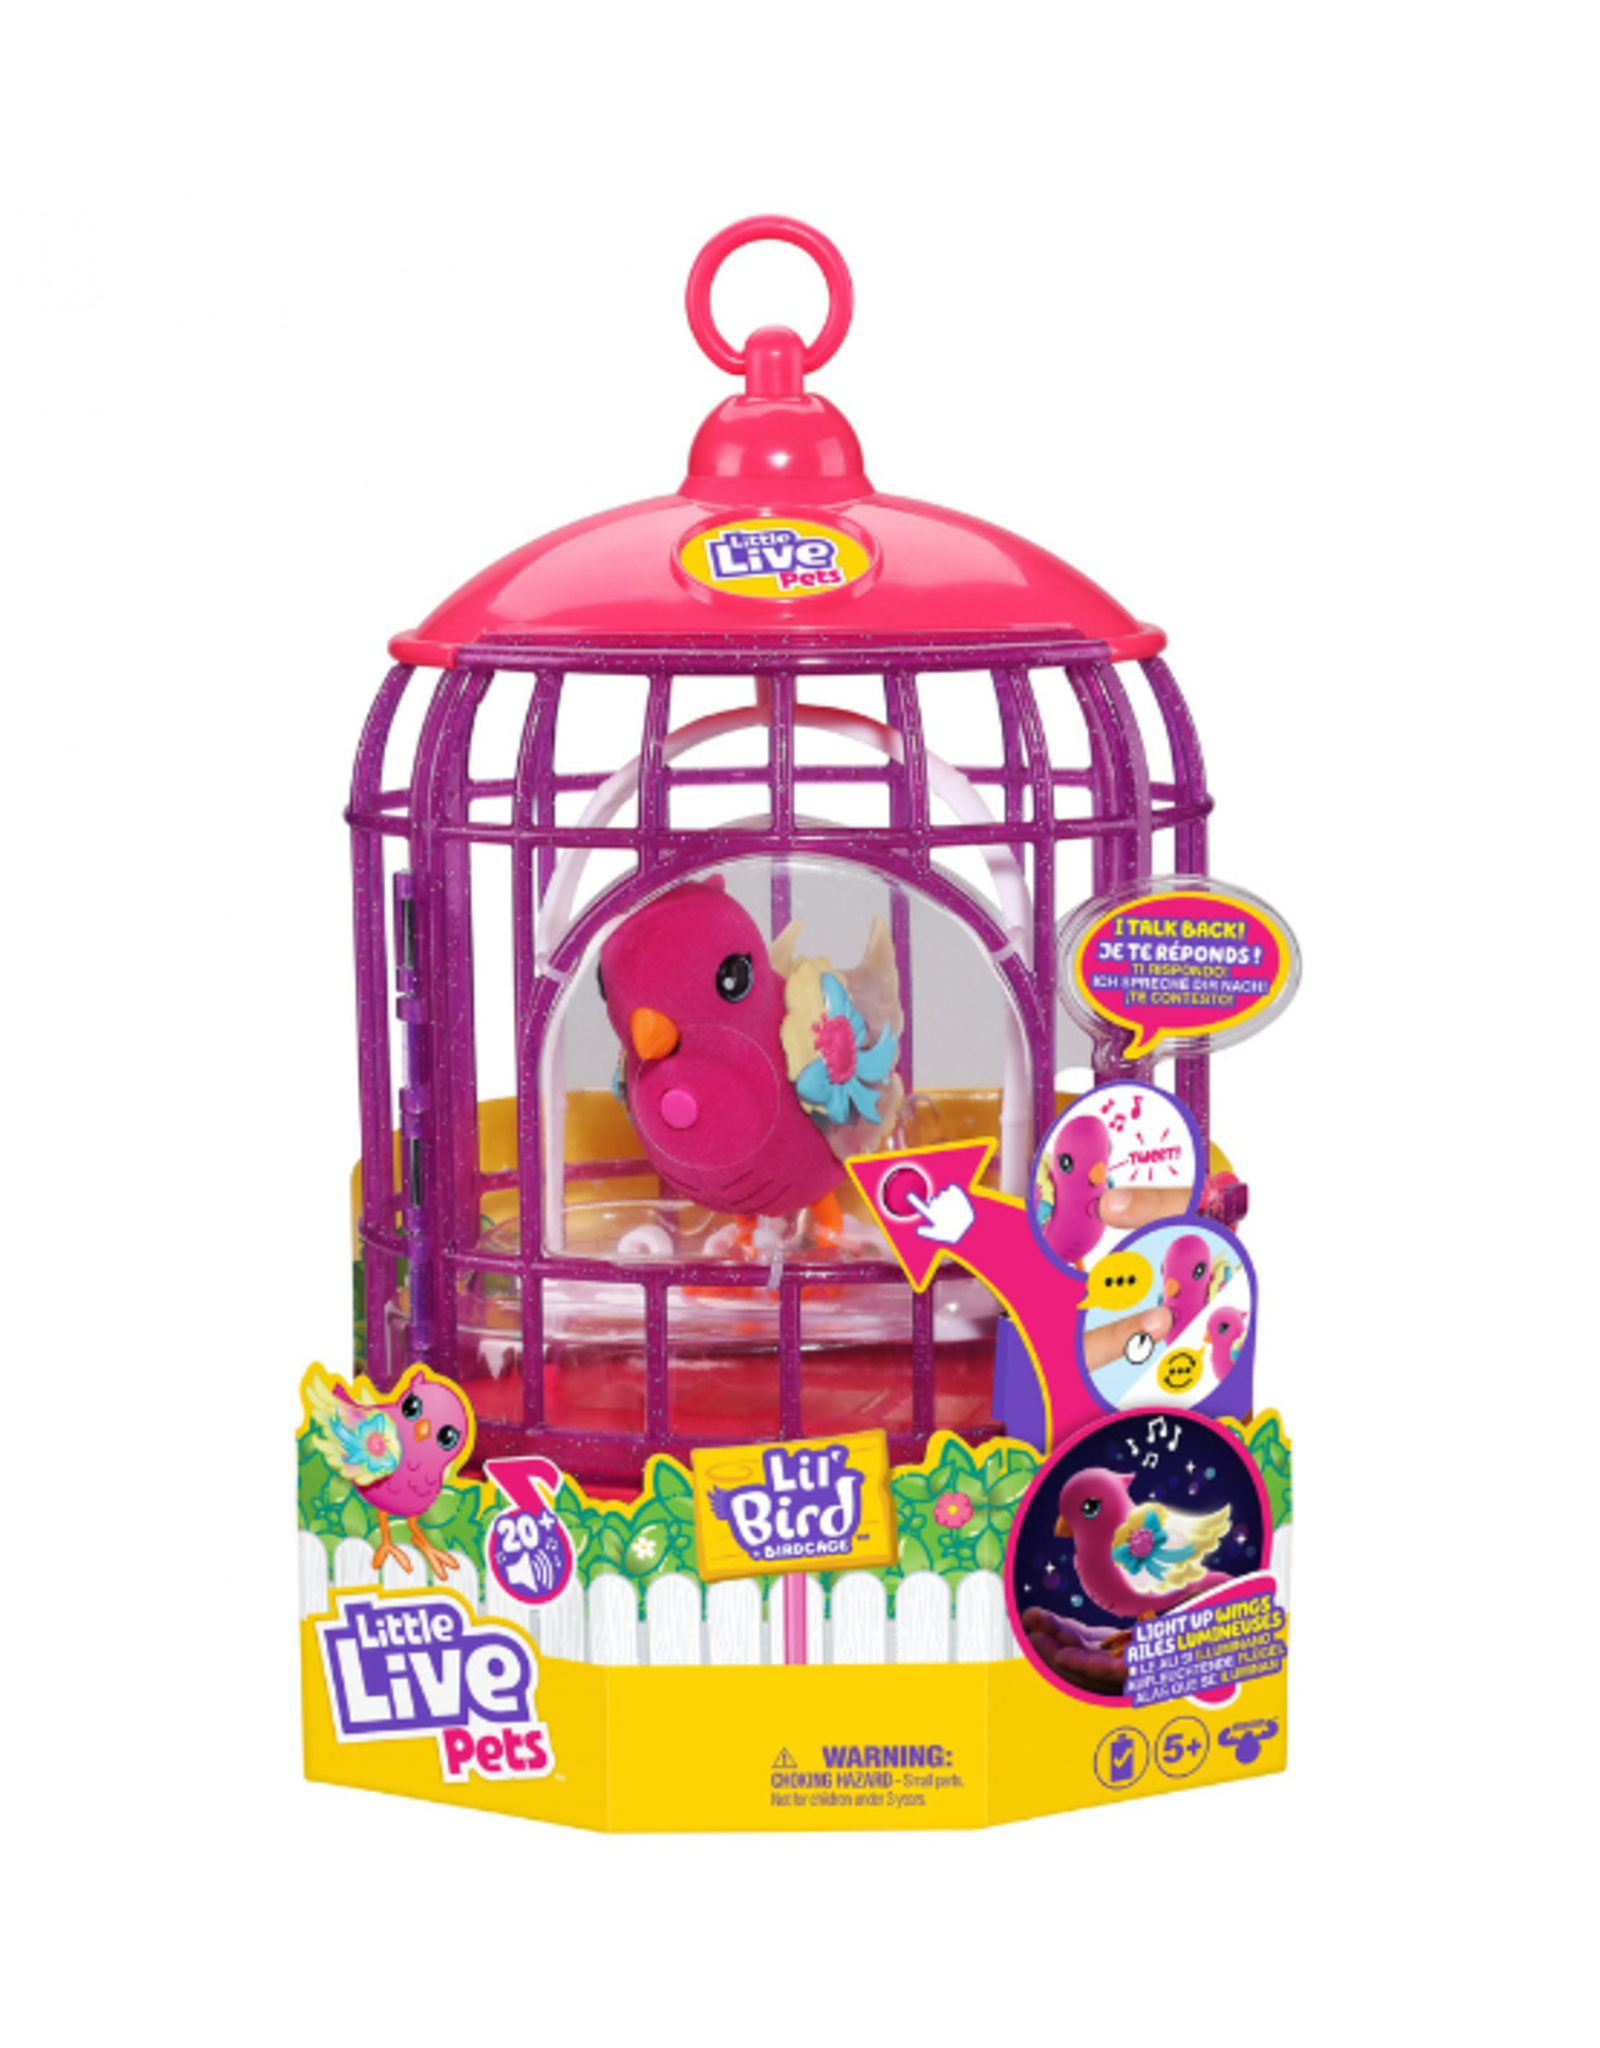 Moose Toys Moose Toys - Little Live Pets Lil' Bird and Bird Cage